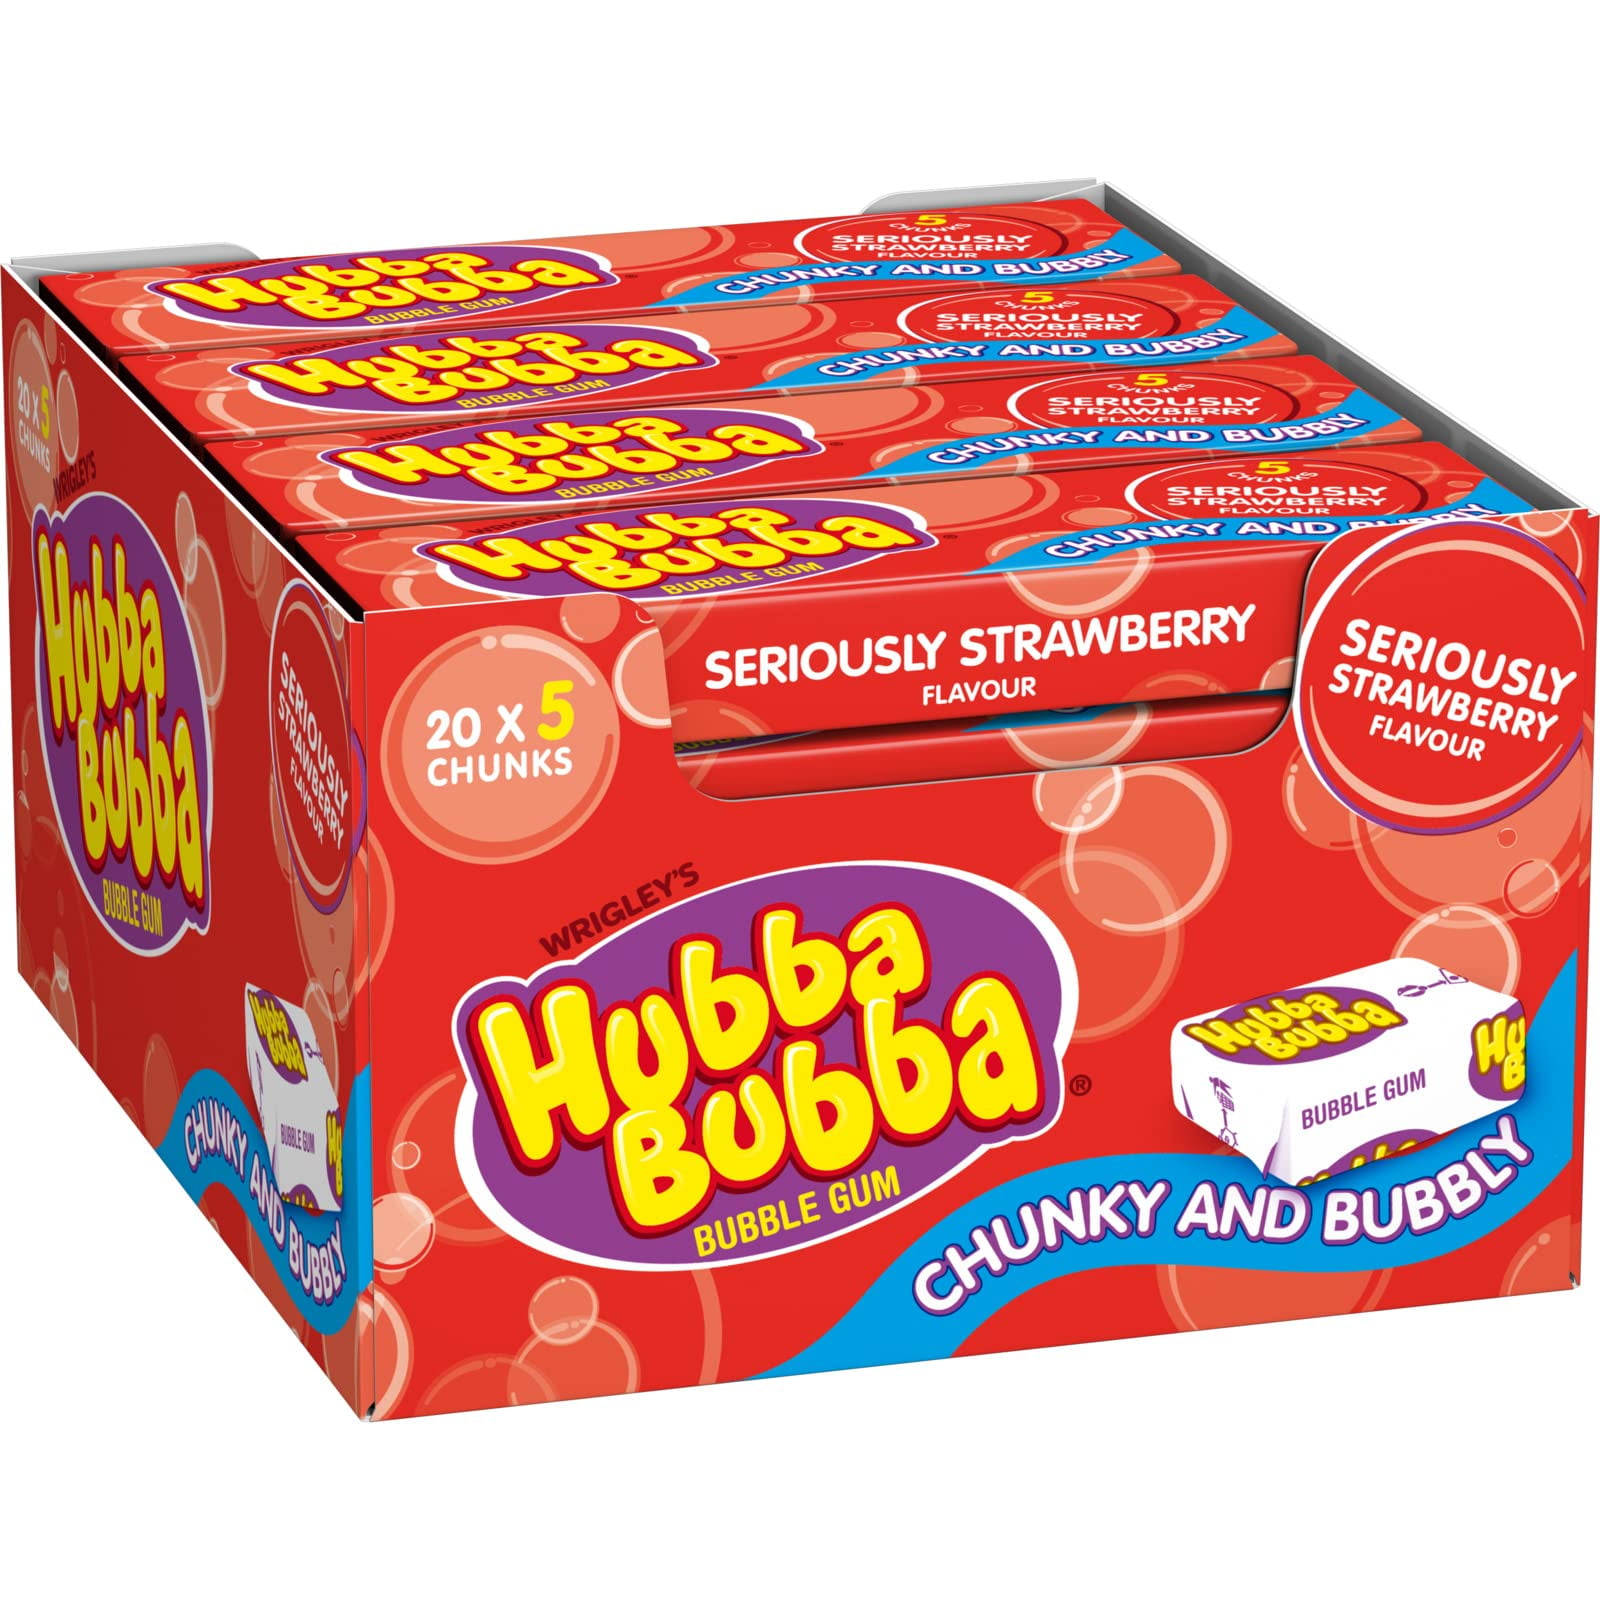 Hubba Bubba Chunky And Bubbly Bubble Gum Strawberry Flavour, 20 X 35 G 